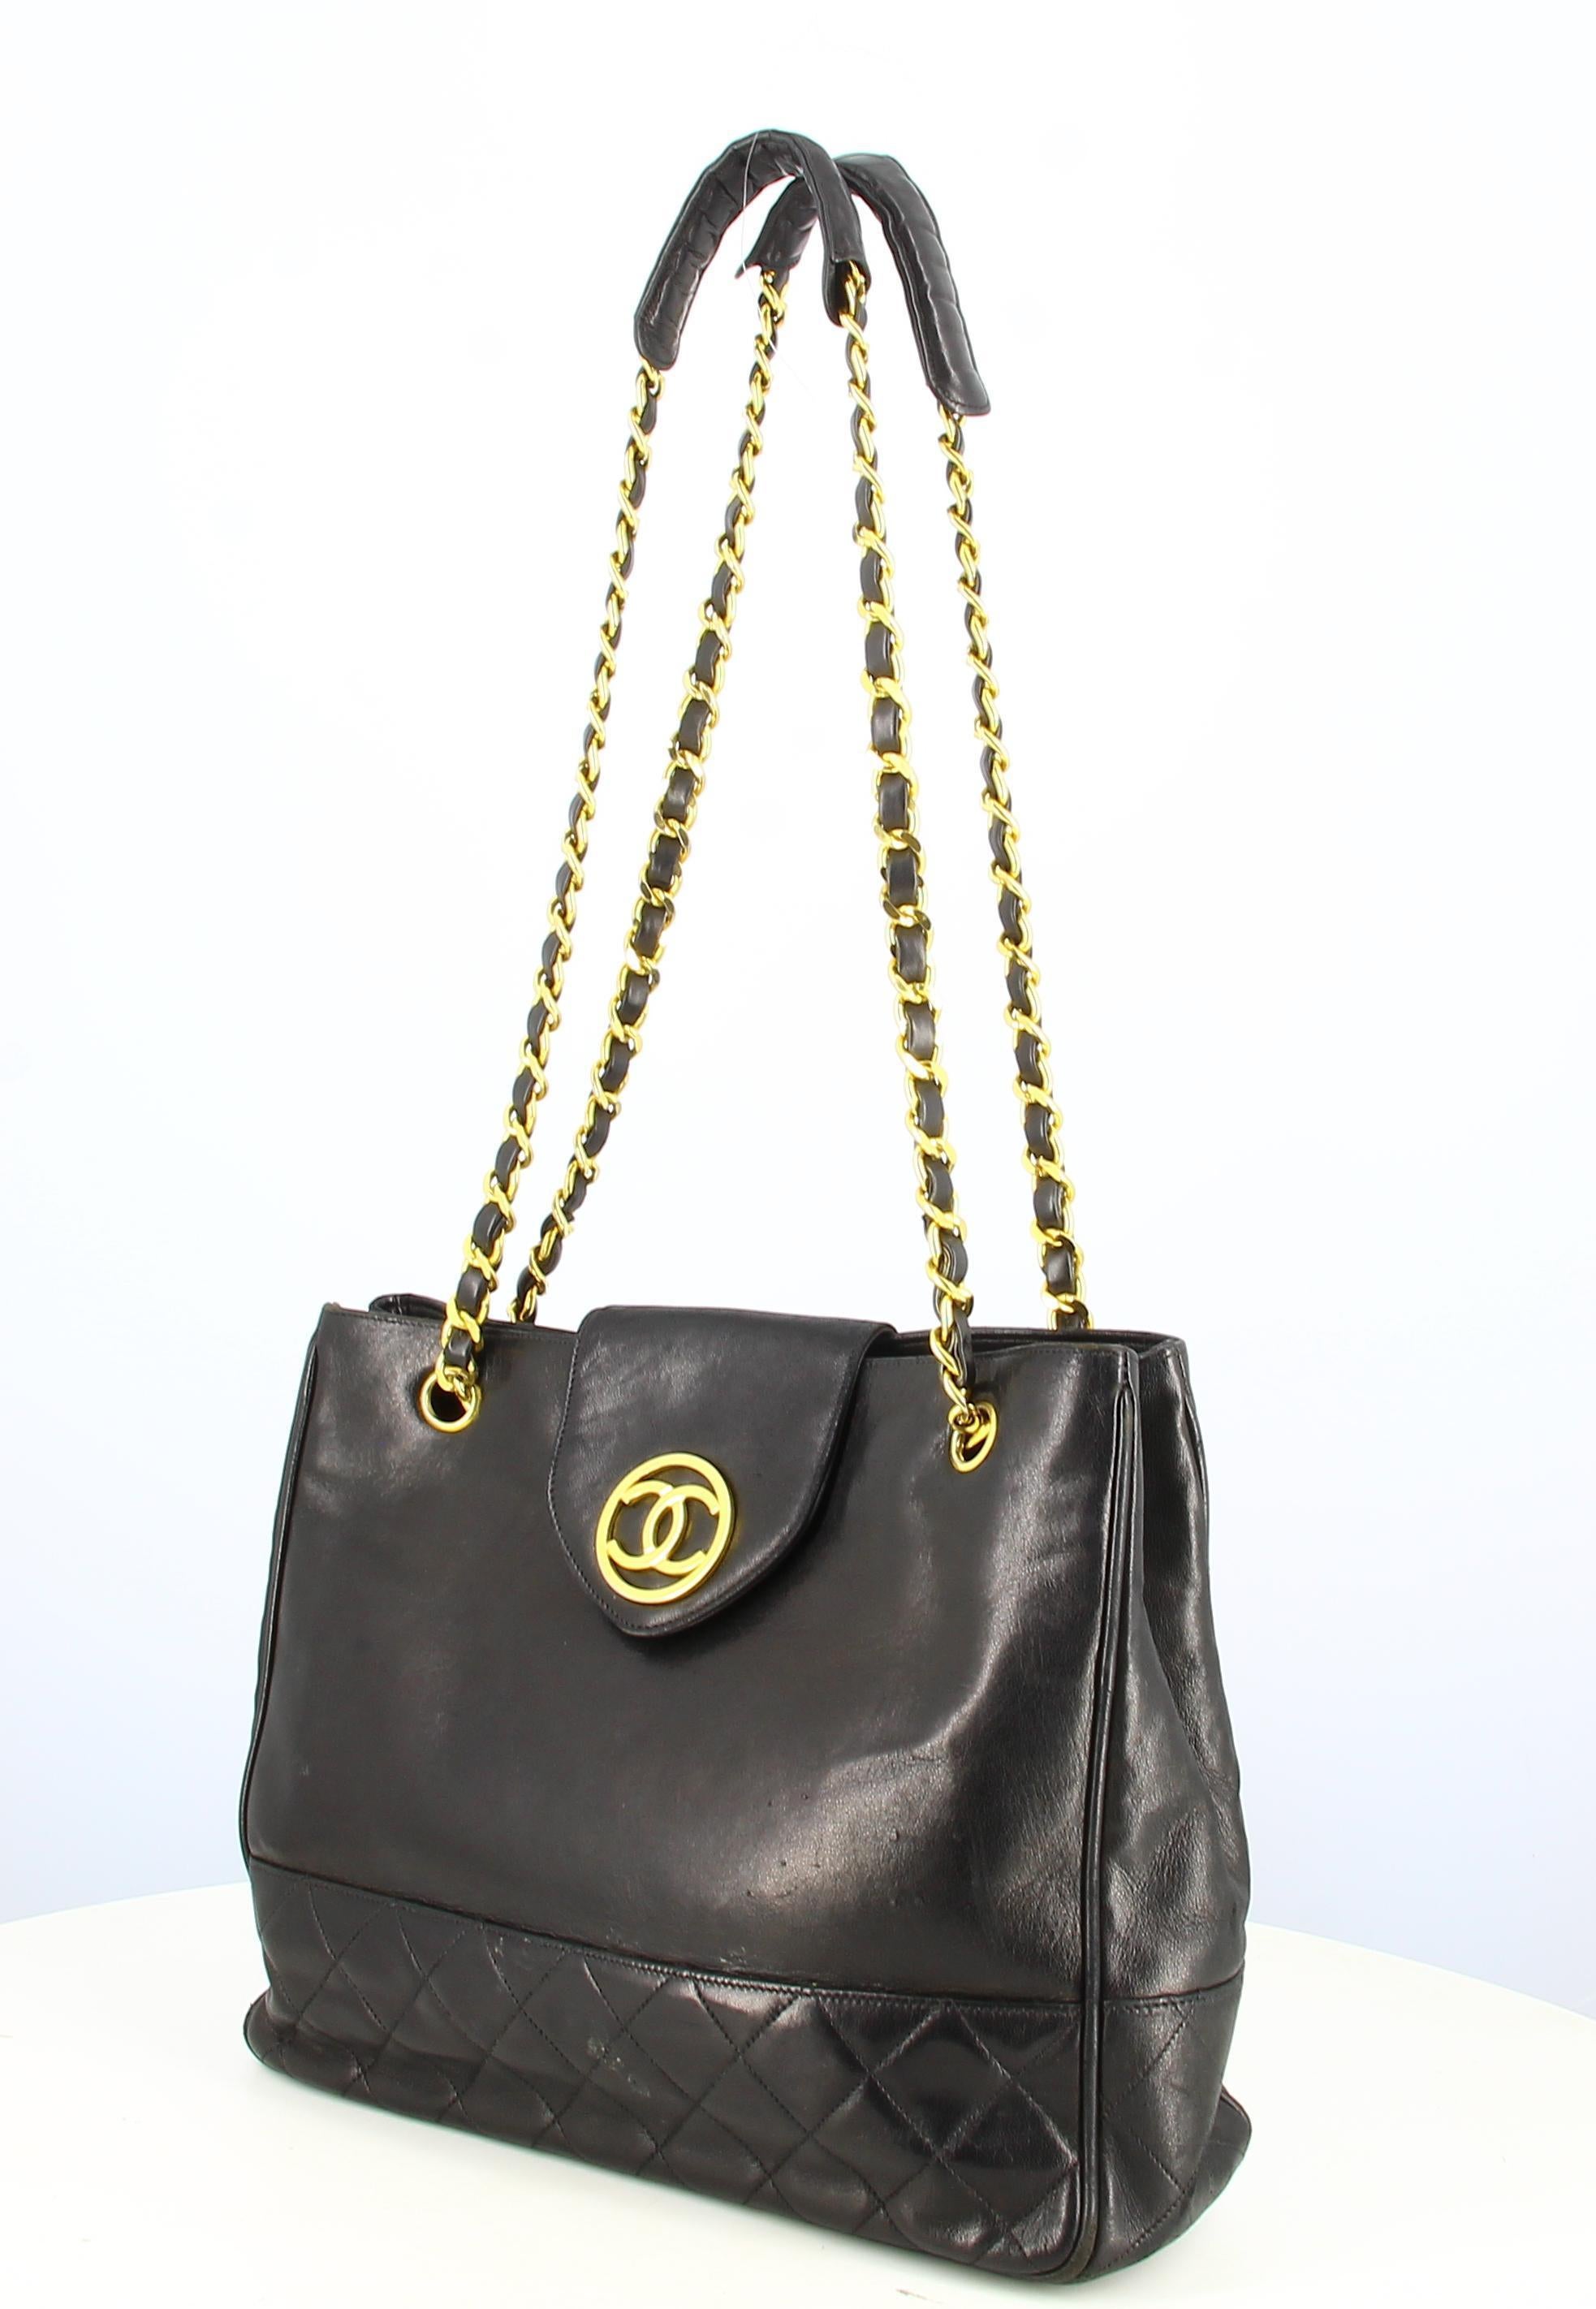 - 1989-1991 Chanel Black Leather Handbag
- In good condition, showing slight wear and tear over time.
- Chanel Black Handbag, Hanses Golden Chain interlaced in black leather. Golden double C clasp, pressure button, padded part at the bottom of the